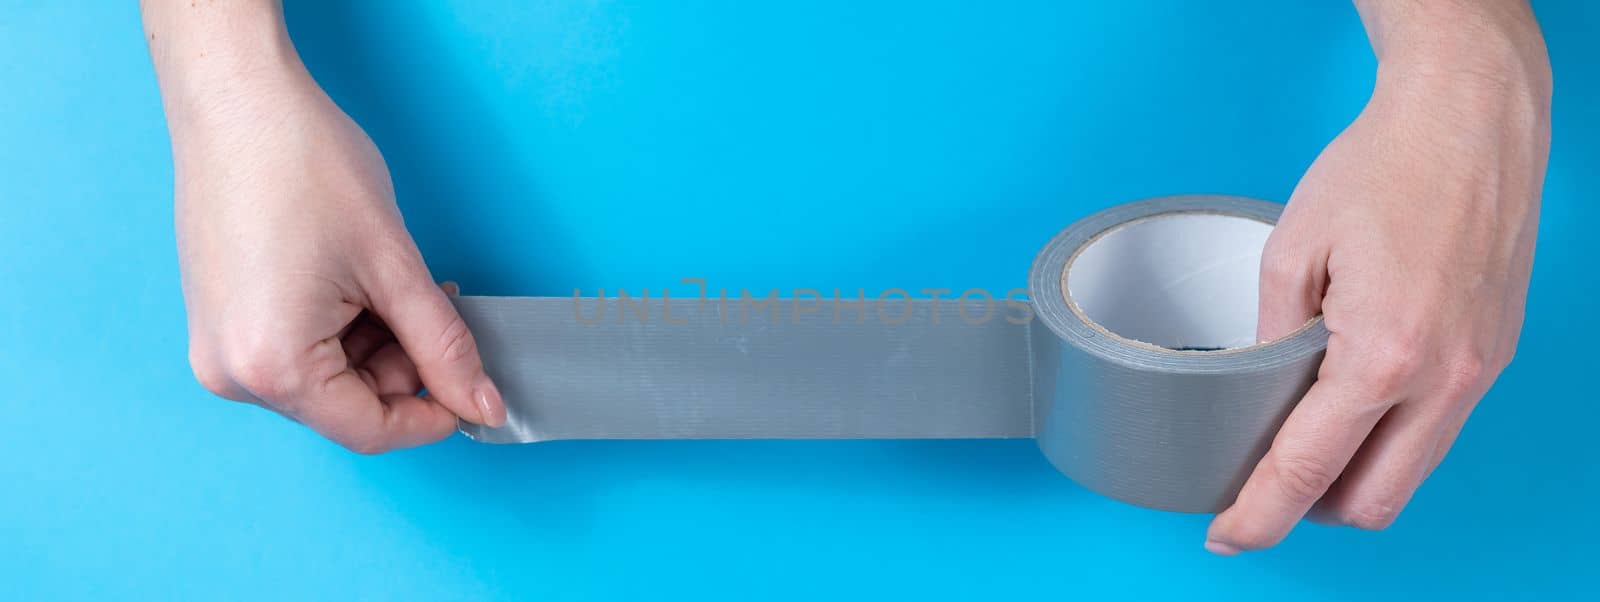 Woman holding silver scotch tape on blue background. by mrwed54